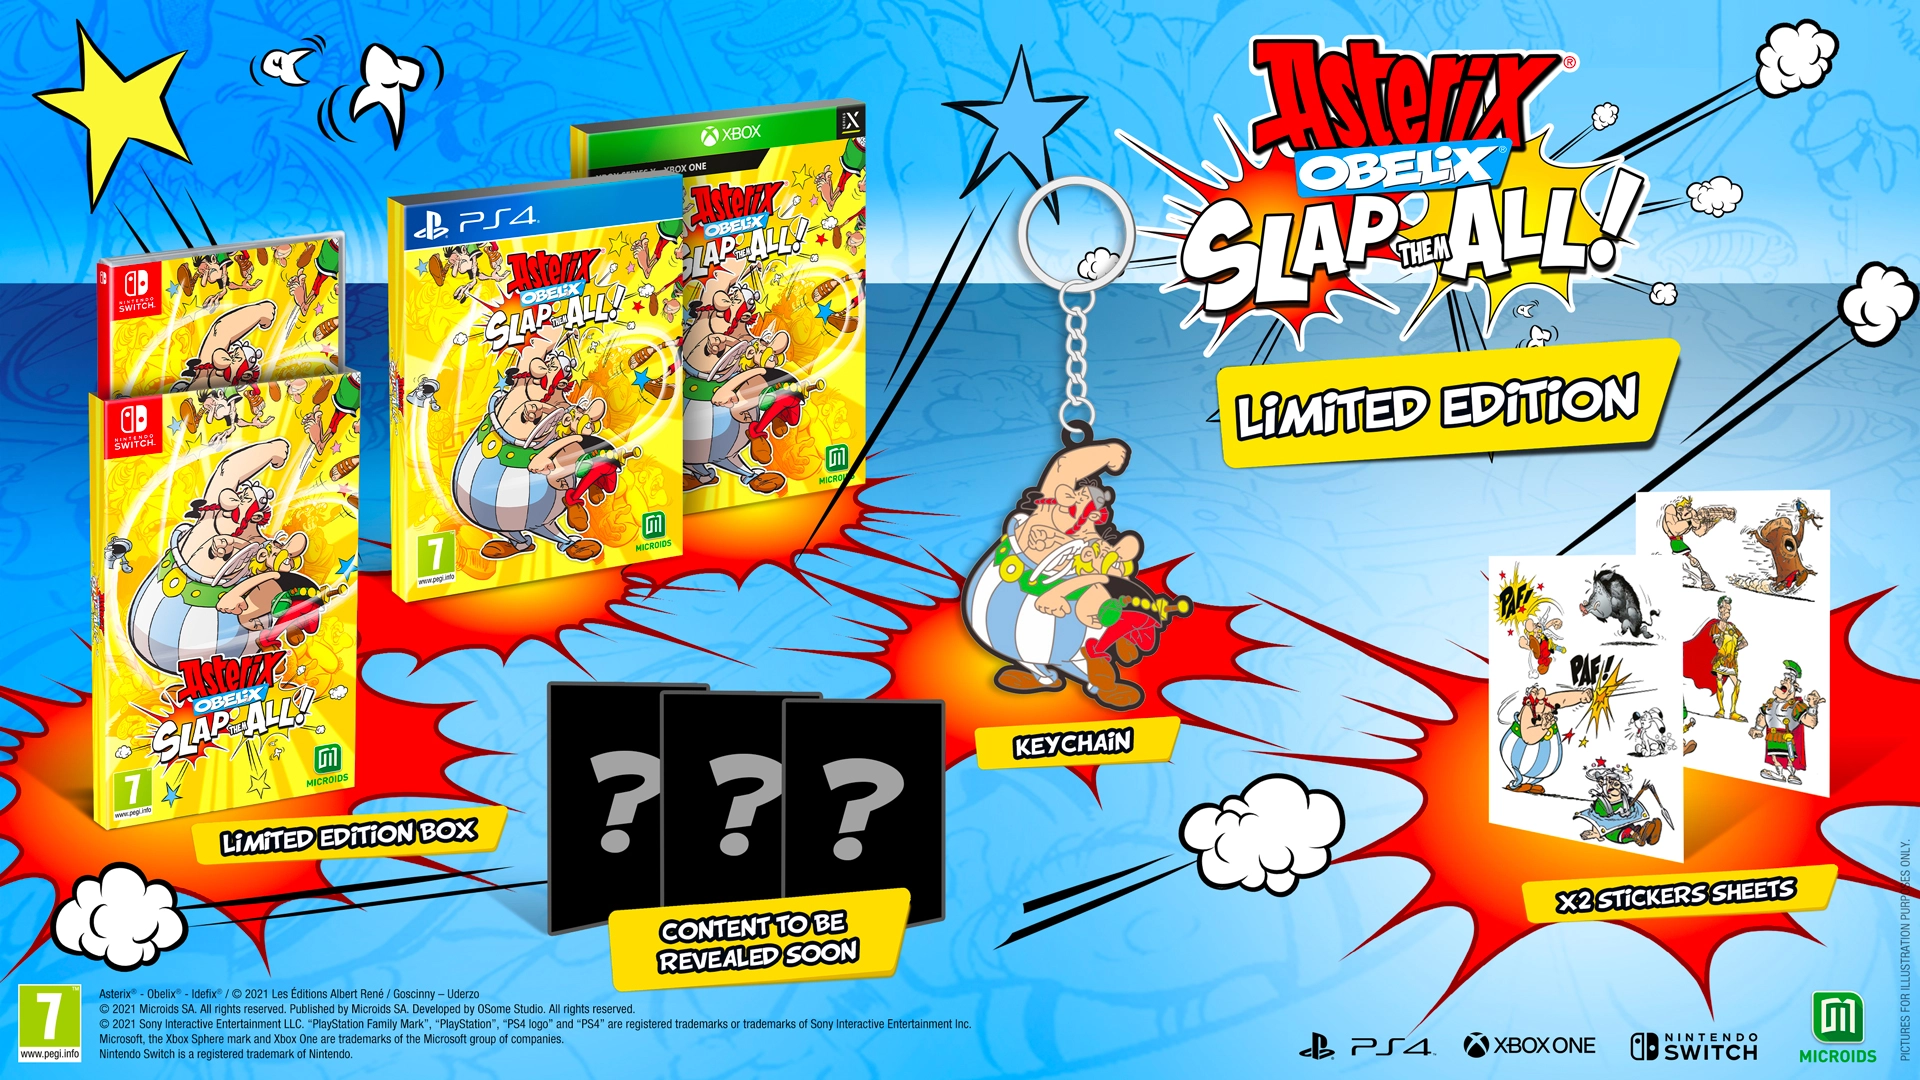 Asterix & Obelix: Slap Them All! - Limited Edition (PS4), Microids